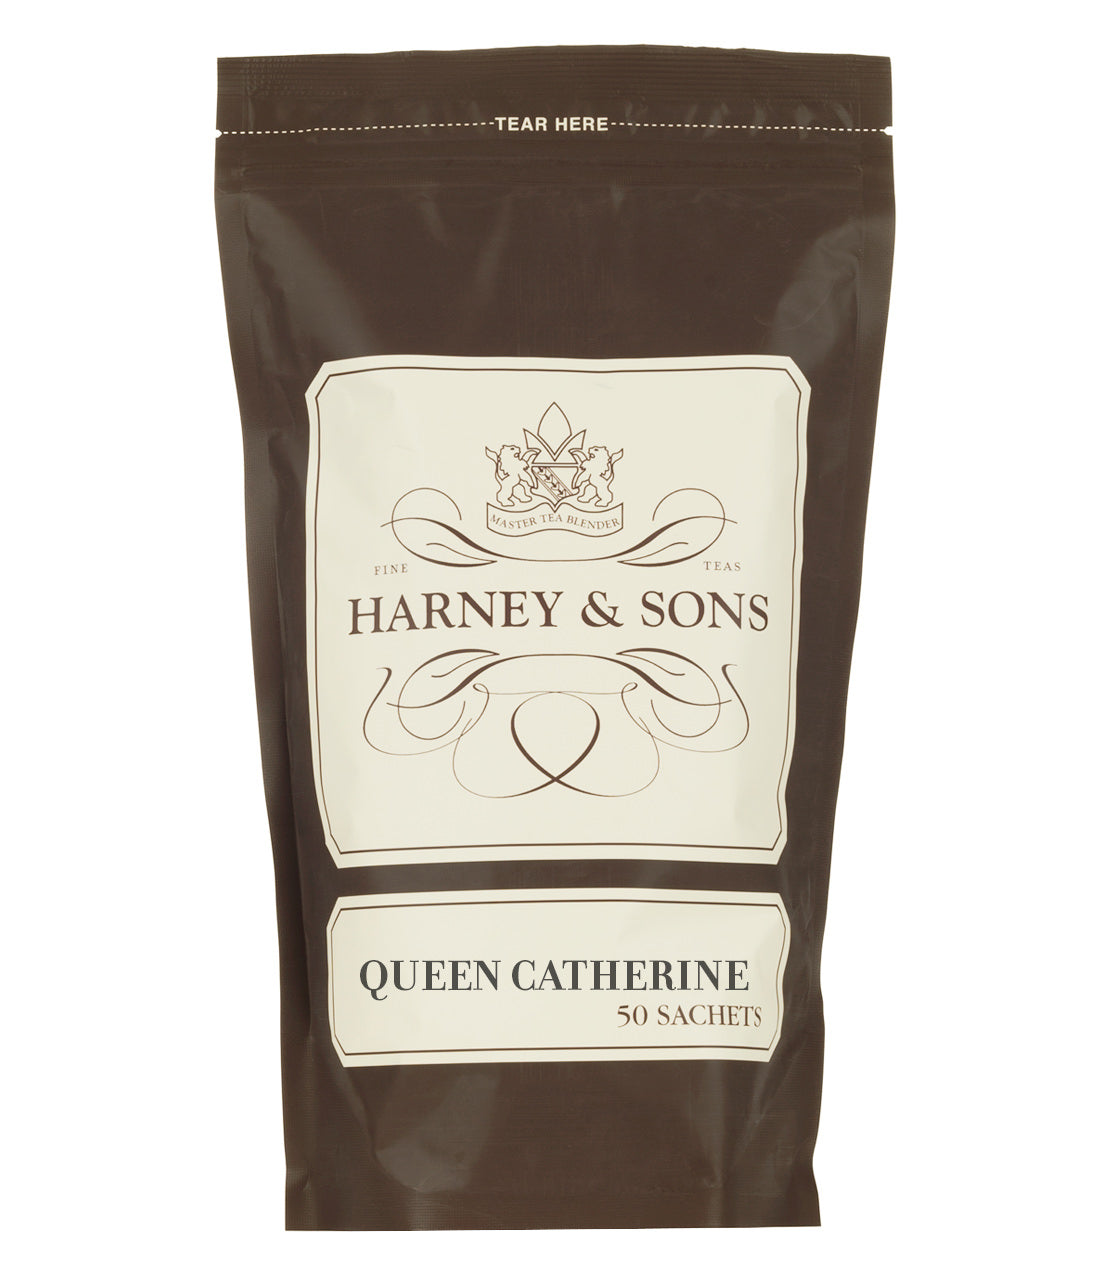 Queen Catherine - 50 Sachets - Chinese Black Tea Blend - Harney